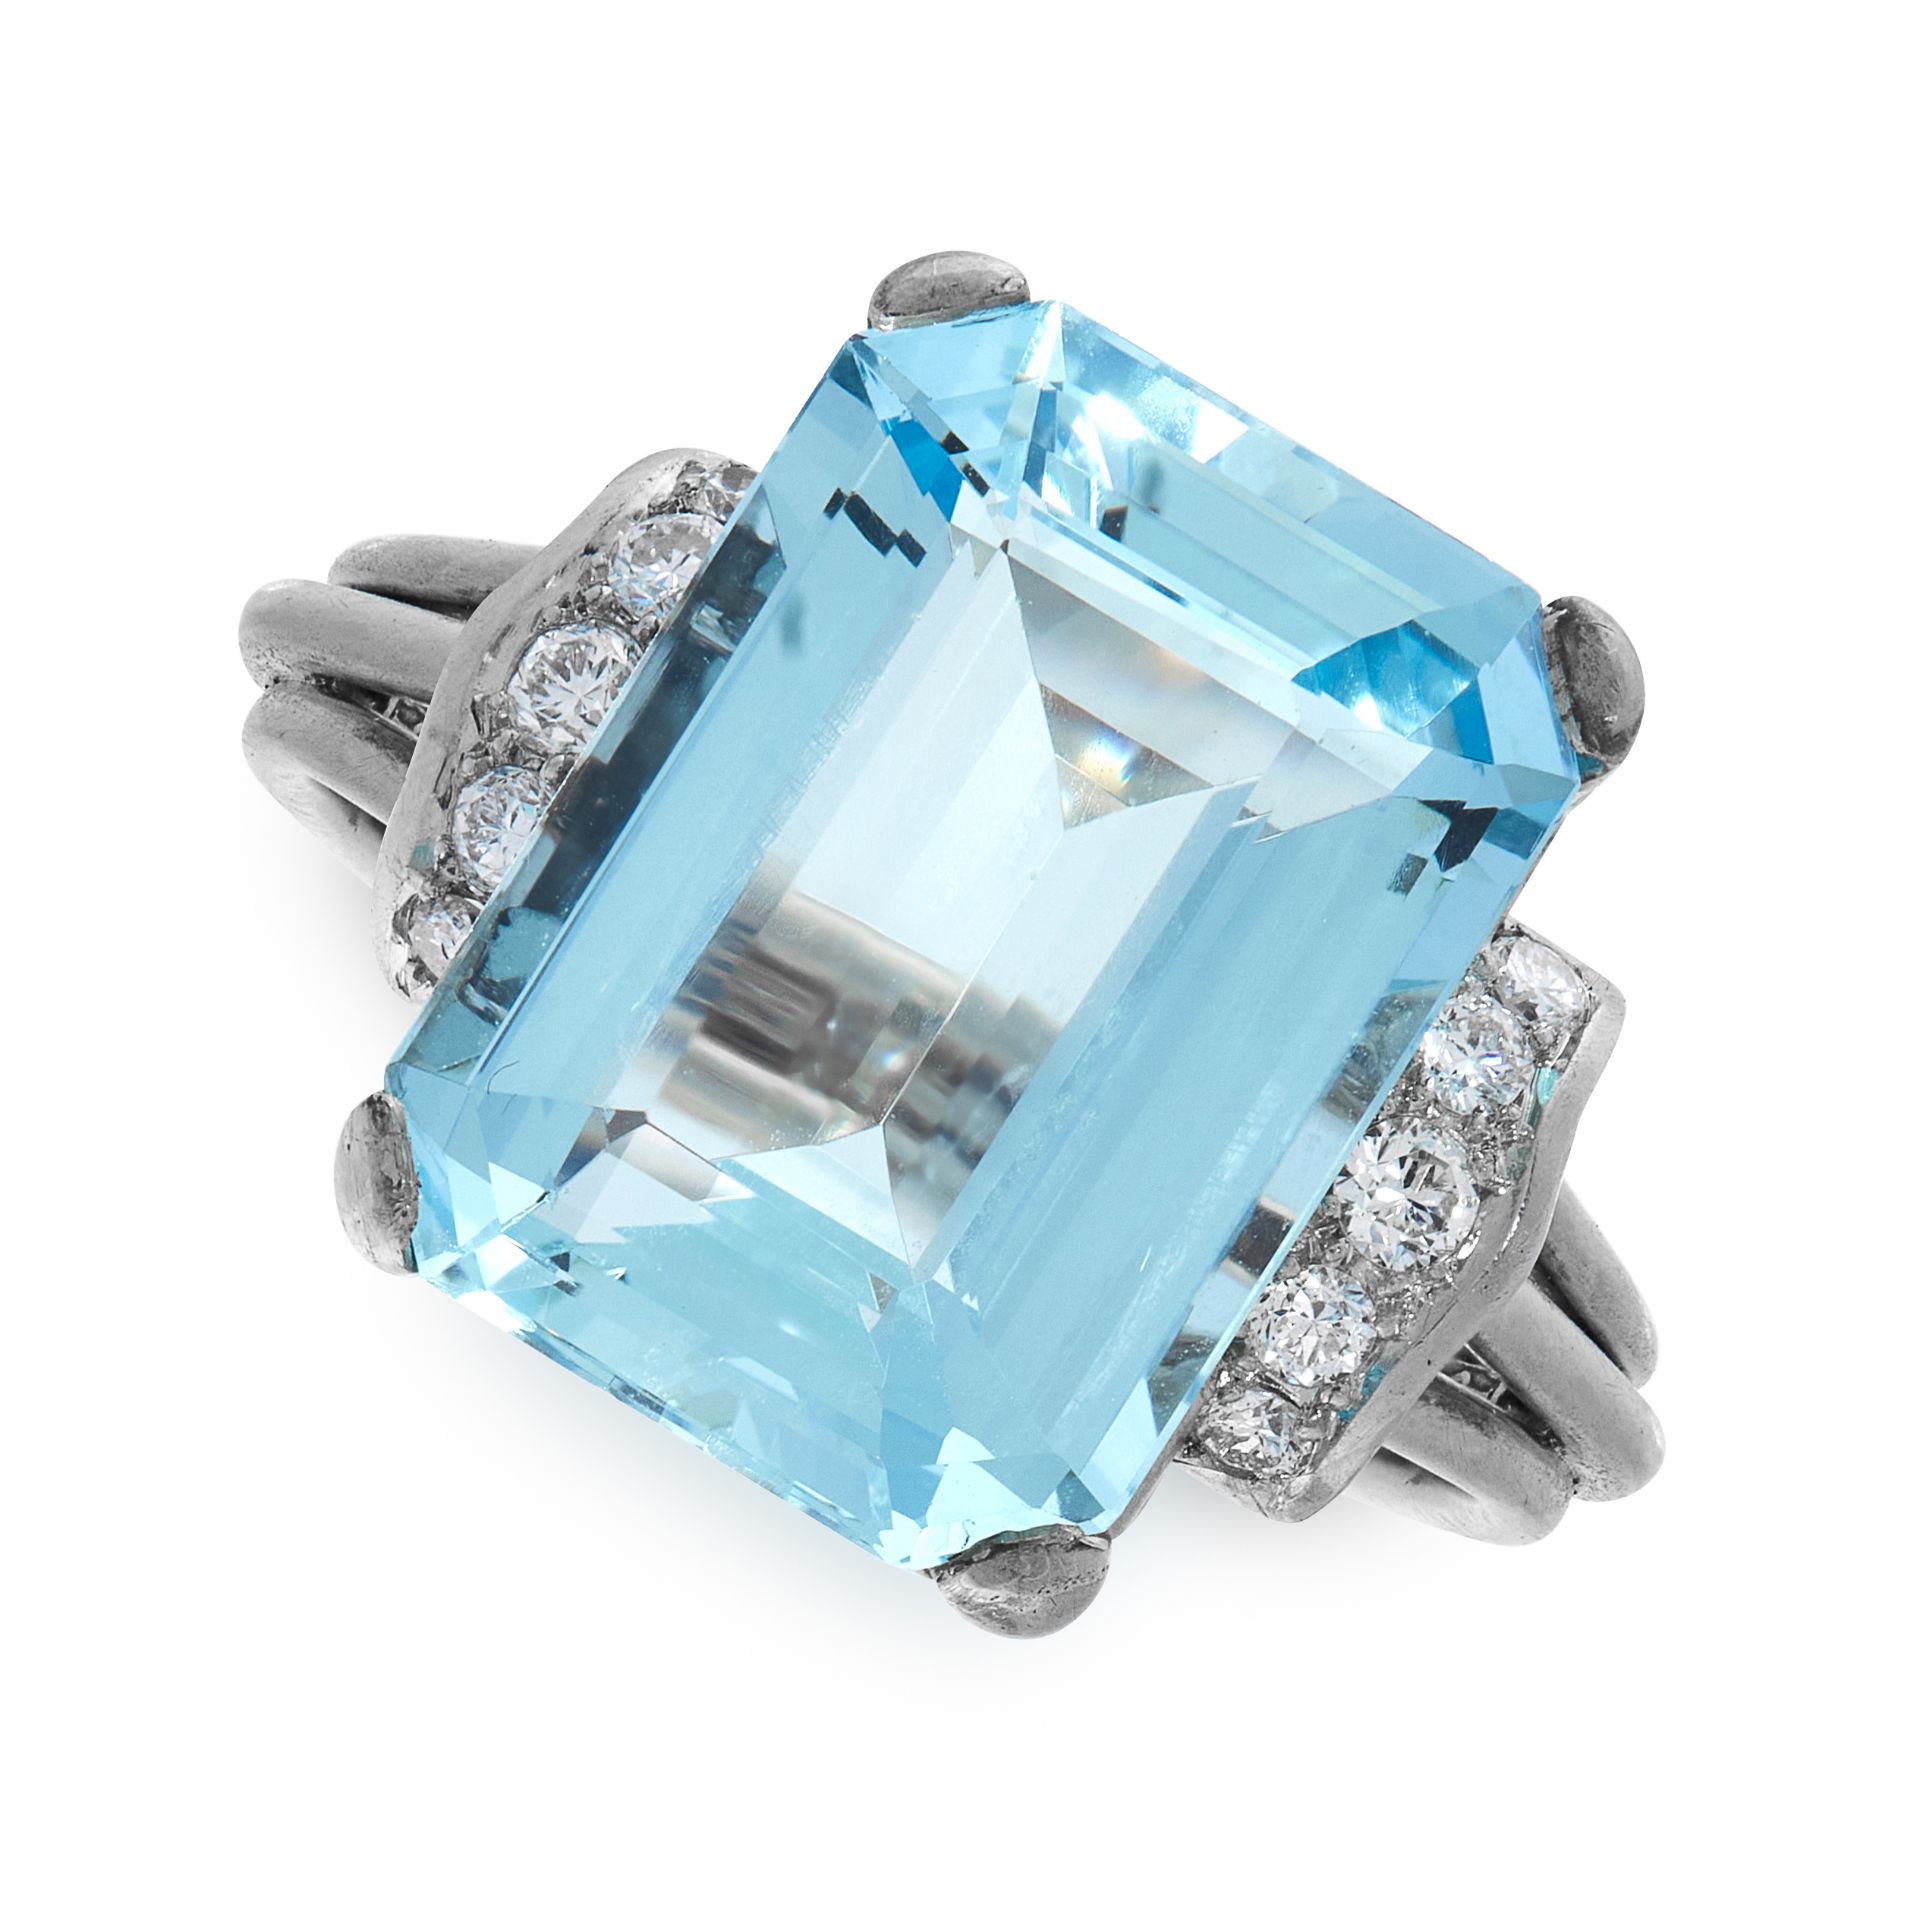 AN AQUAMARINE AND DIAMOND RING in 14ct white gold, set with an emerald cut aquamarine of 12.88